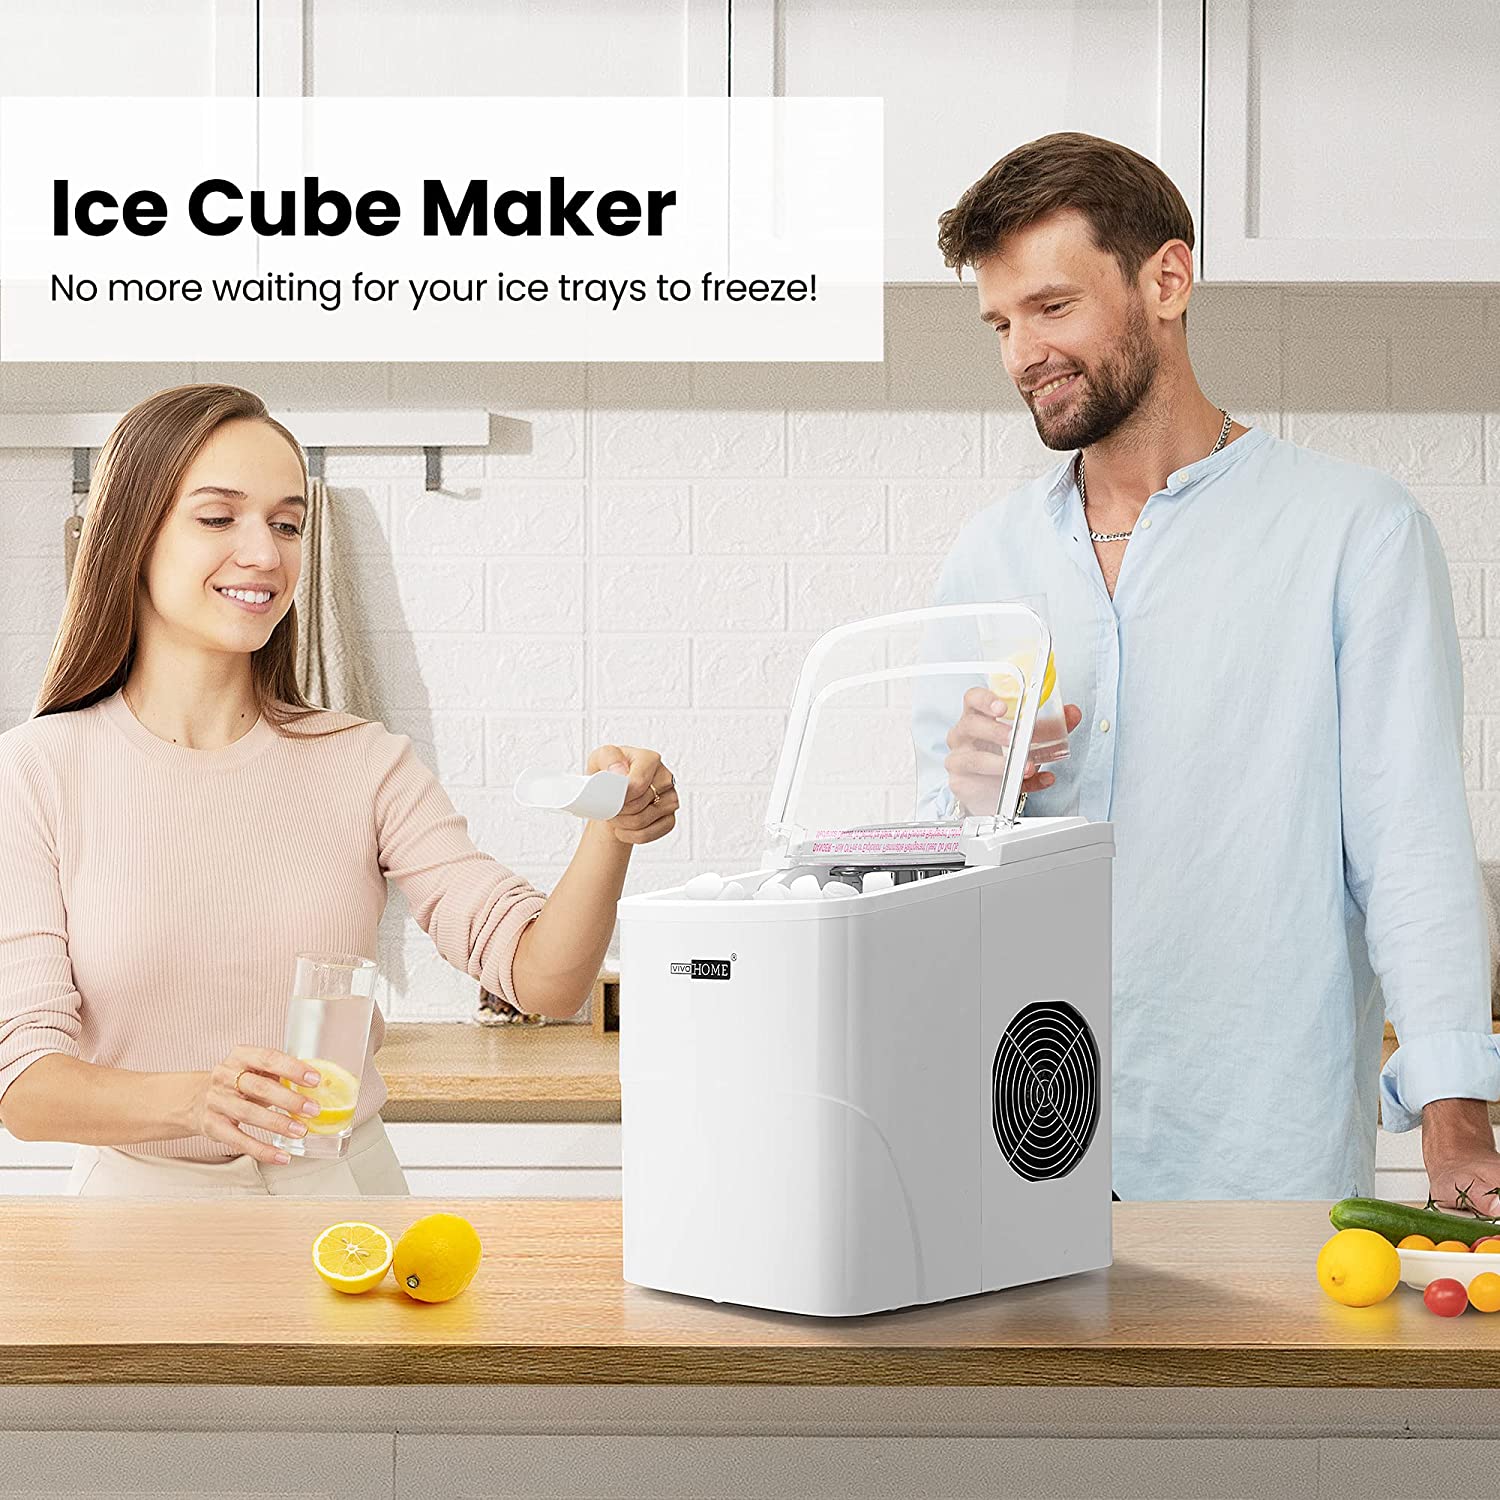 VIVOHOME Bullet Shaped Home Commercial Countertop Ice Maker Machine